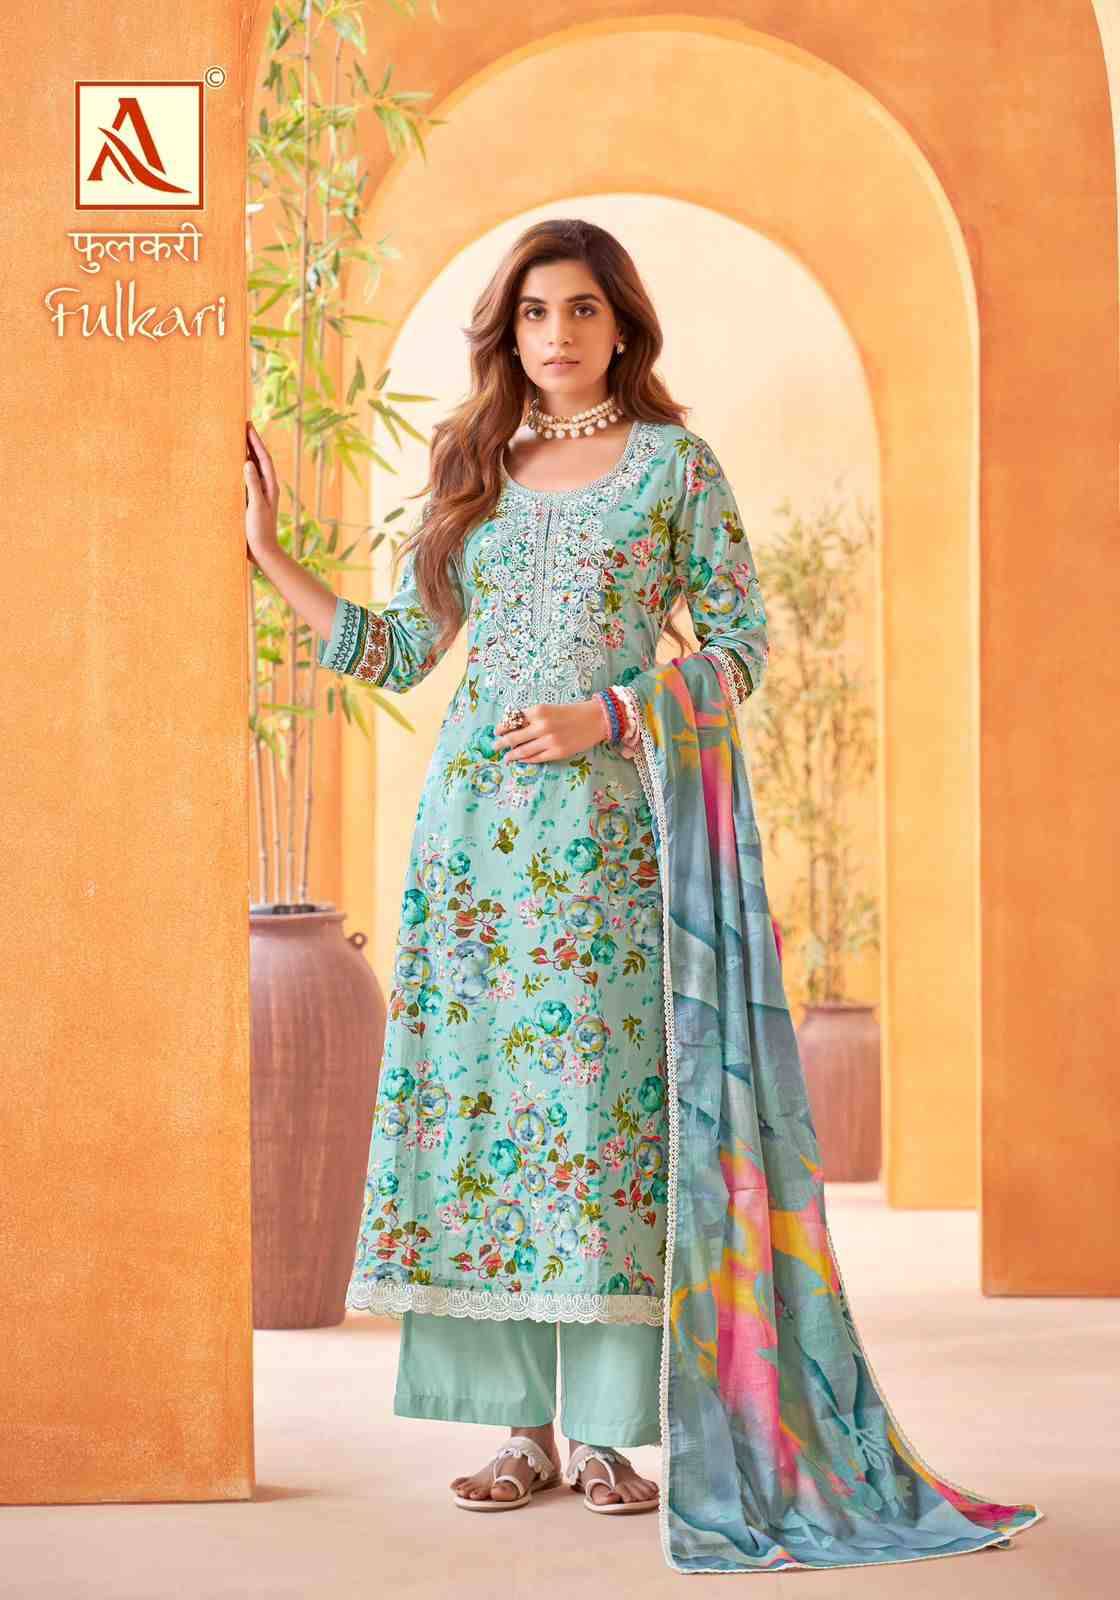 Fulkari By Alok Suit 1523-001 To 1523-008 Series Beautiful Festival Suits Stylish Fancy Colorful Casual Wear & Ethnic Wear Pure Cambric Cotton Print Dresses At Wholesale Price